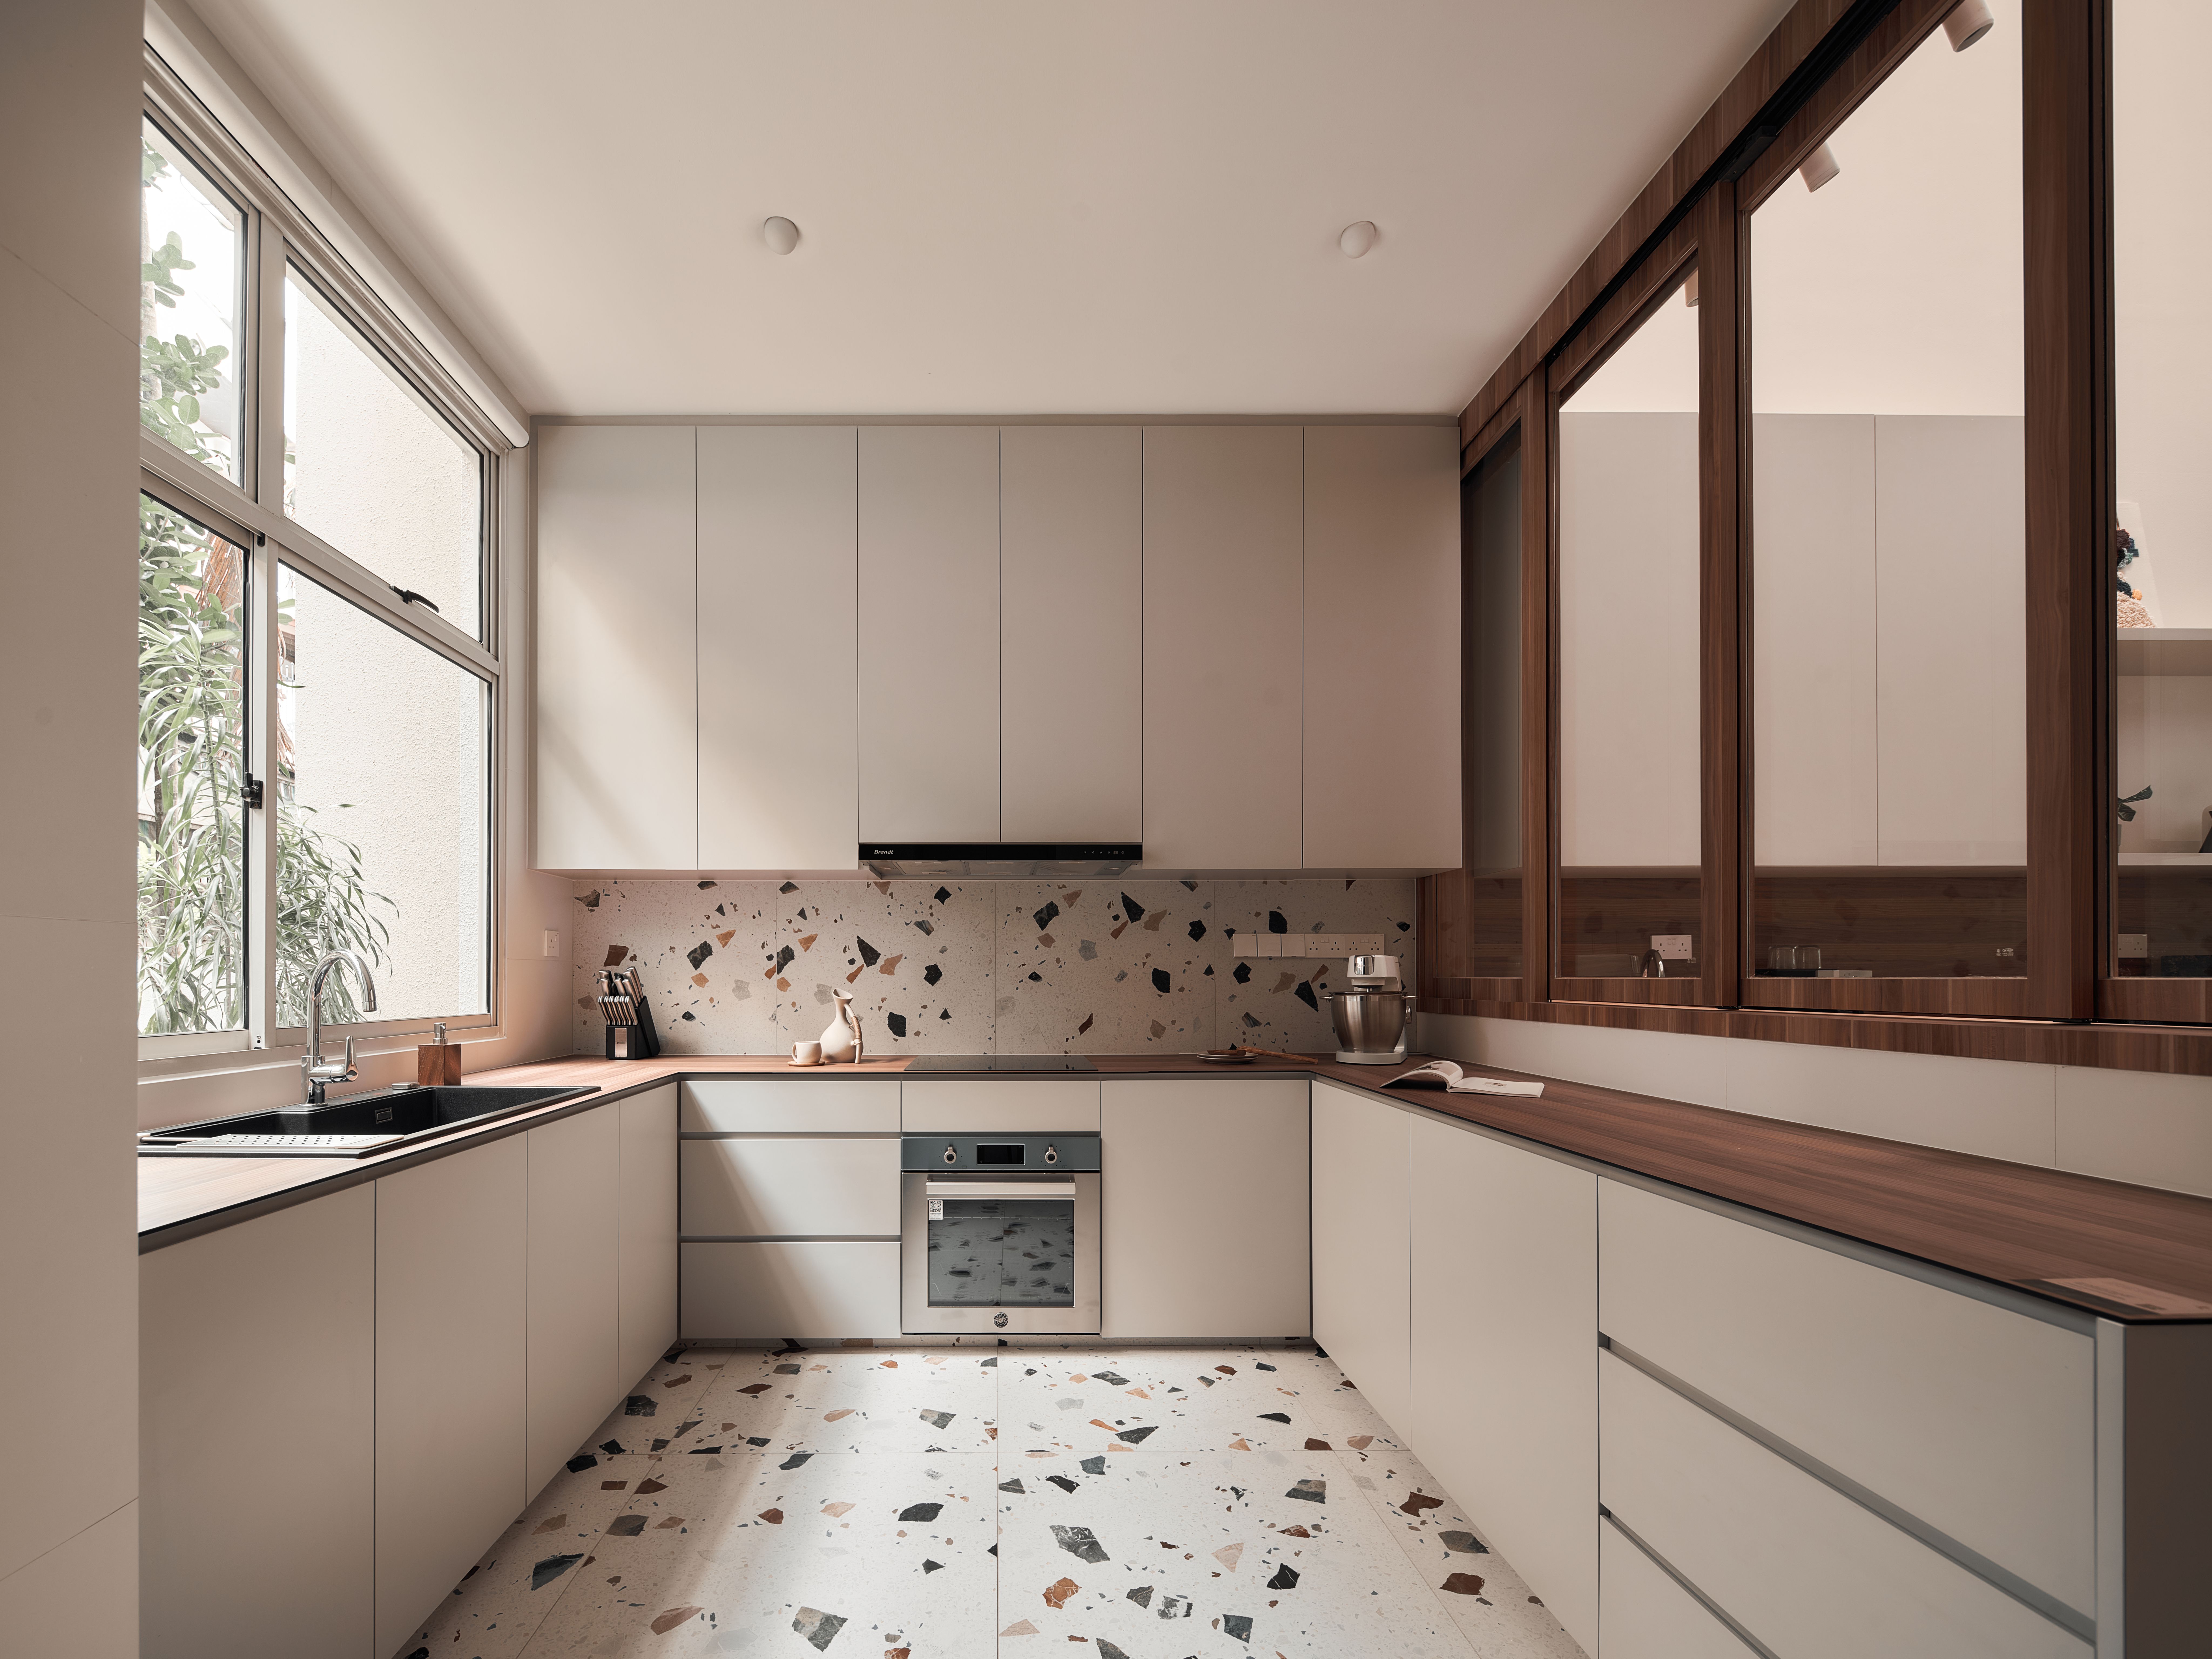 Spacious kitchen featuring a stainless steel oven, sink, and Terrazzo Tiles flooring